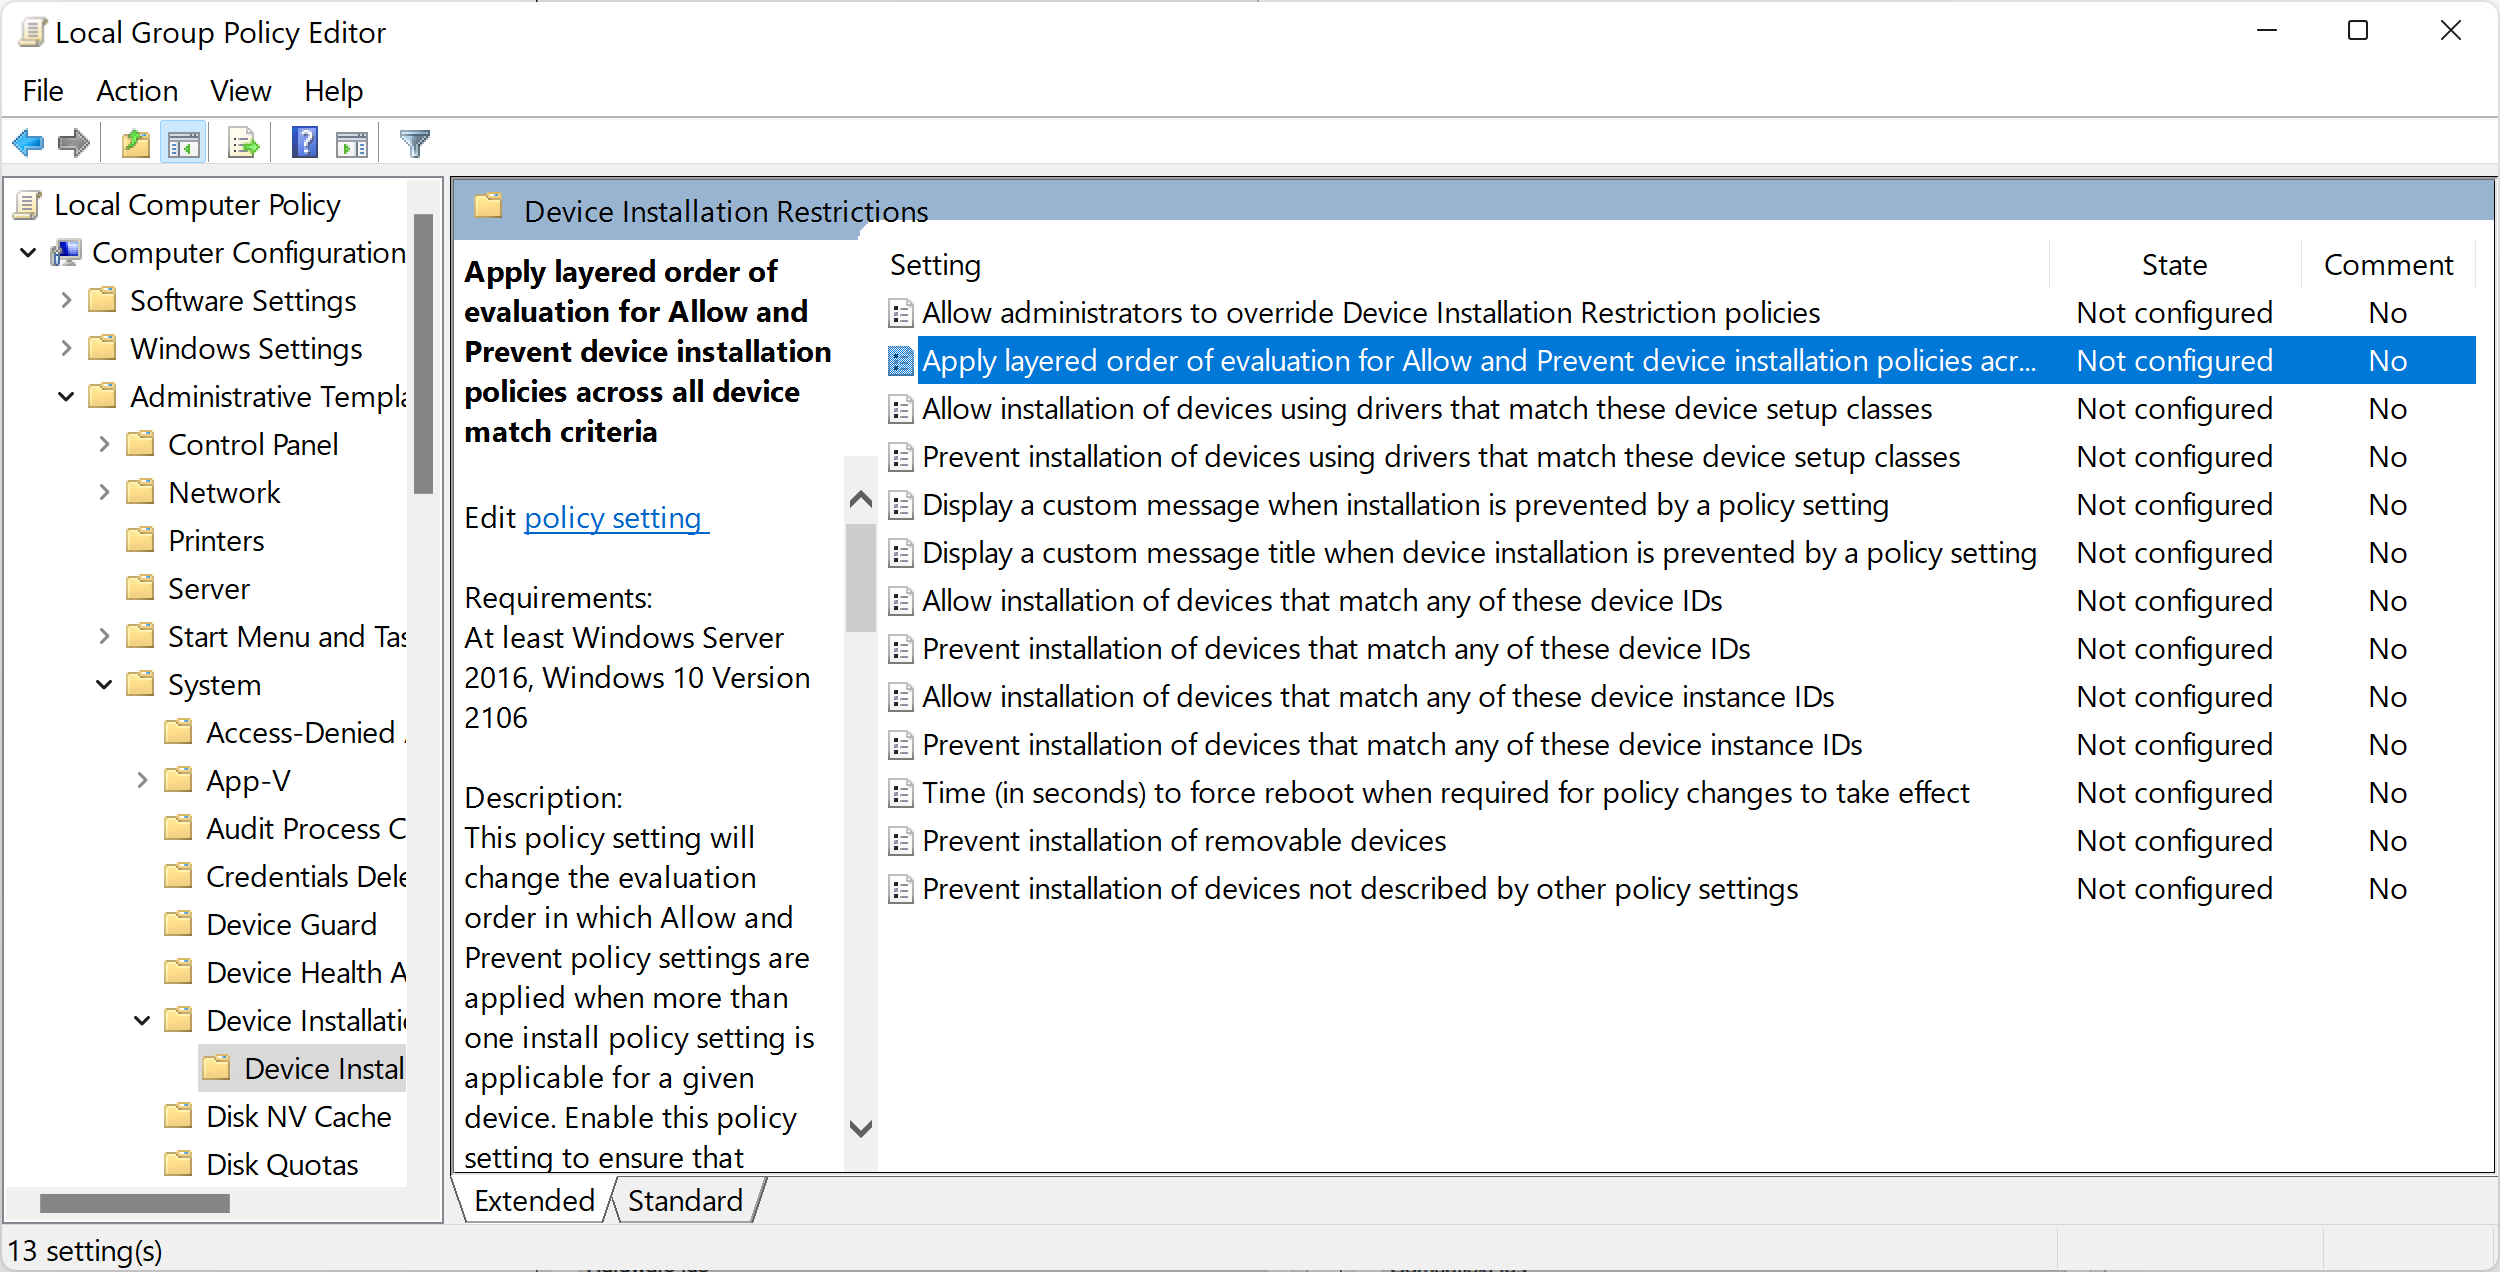 Group Policy Editor interface